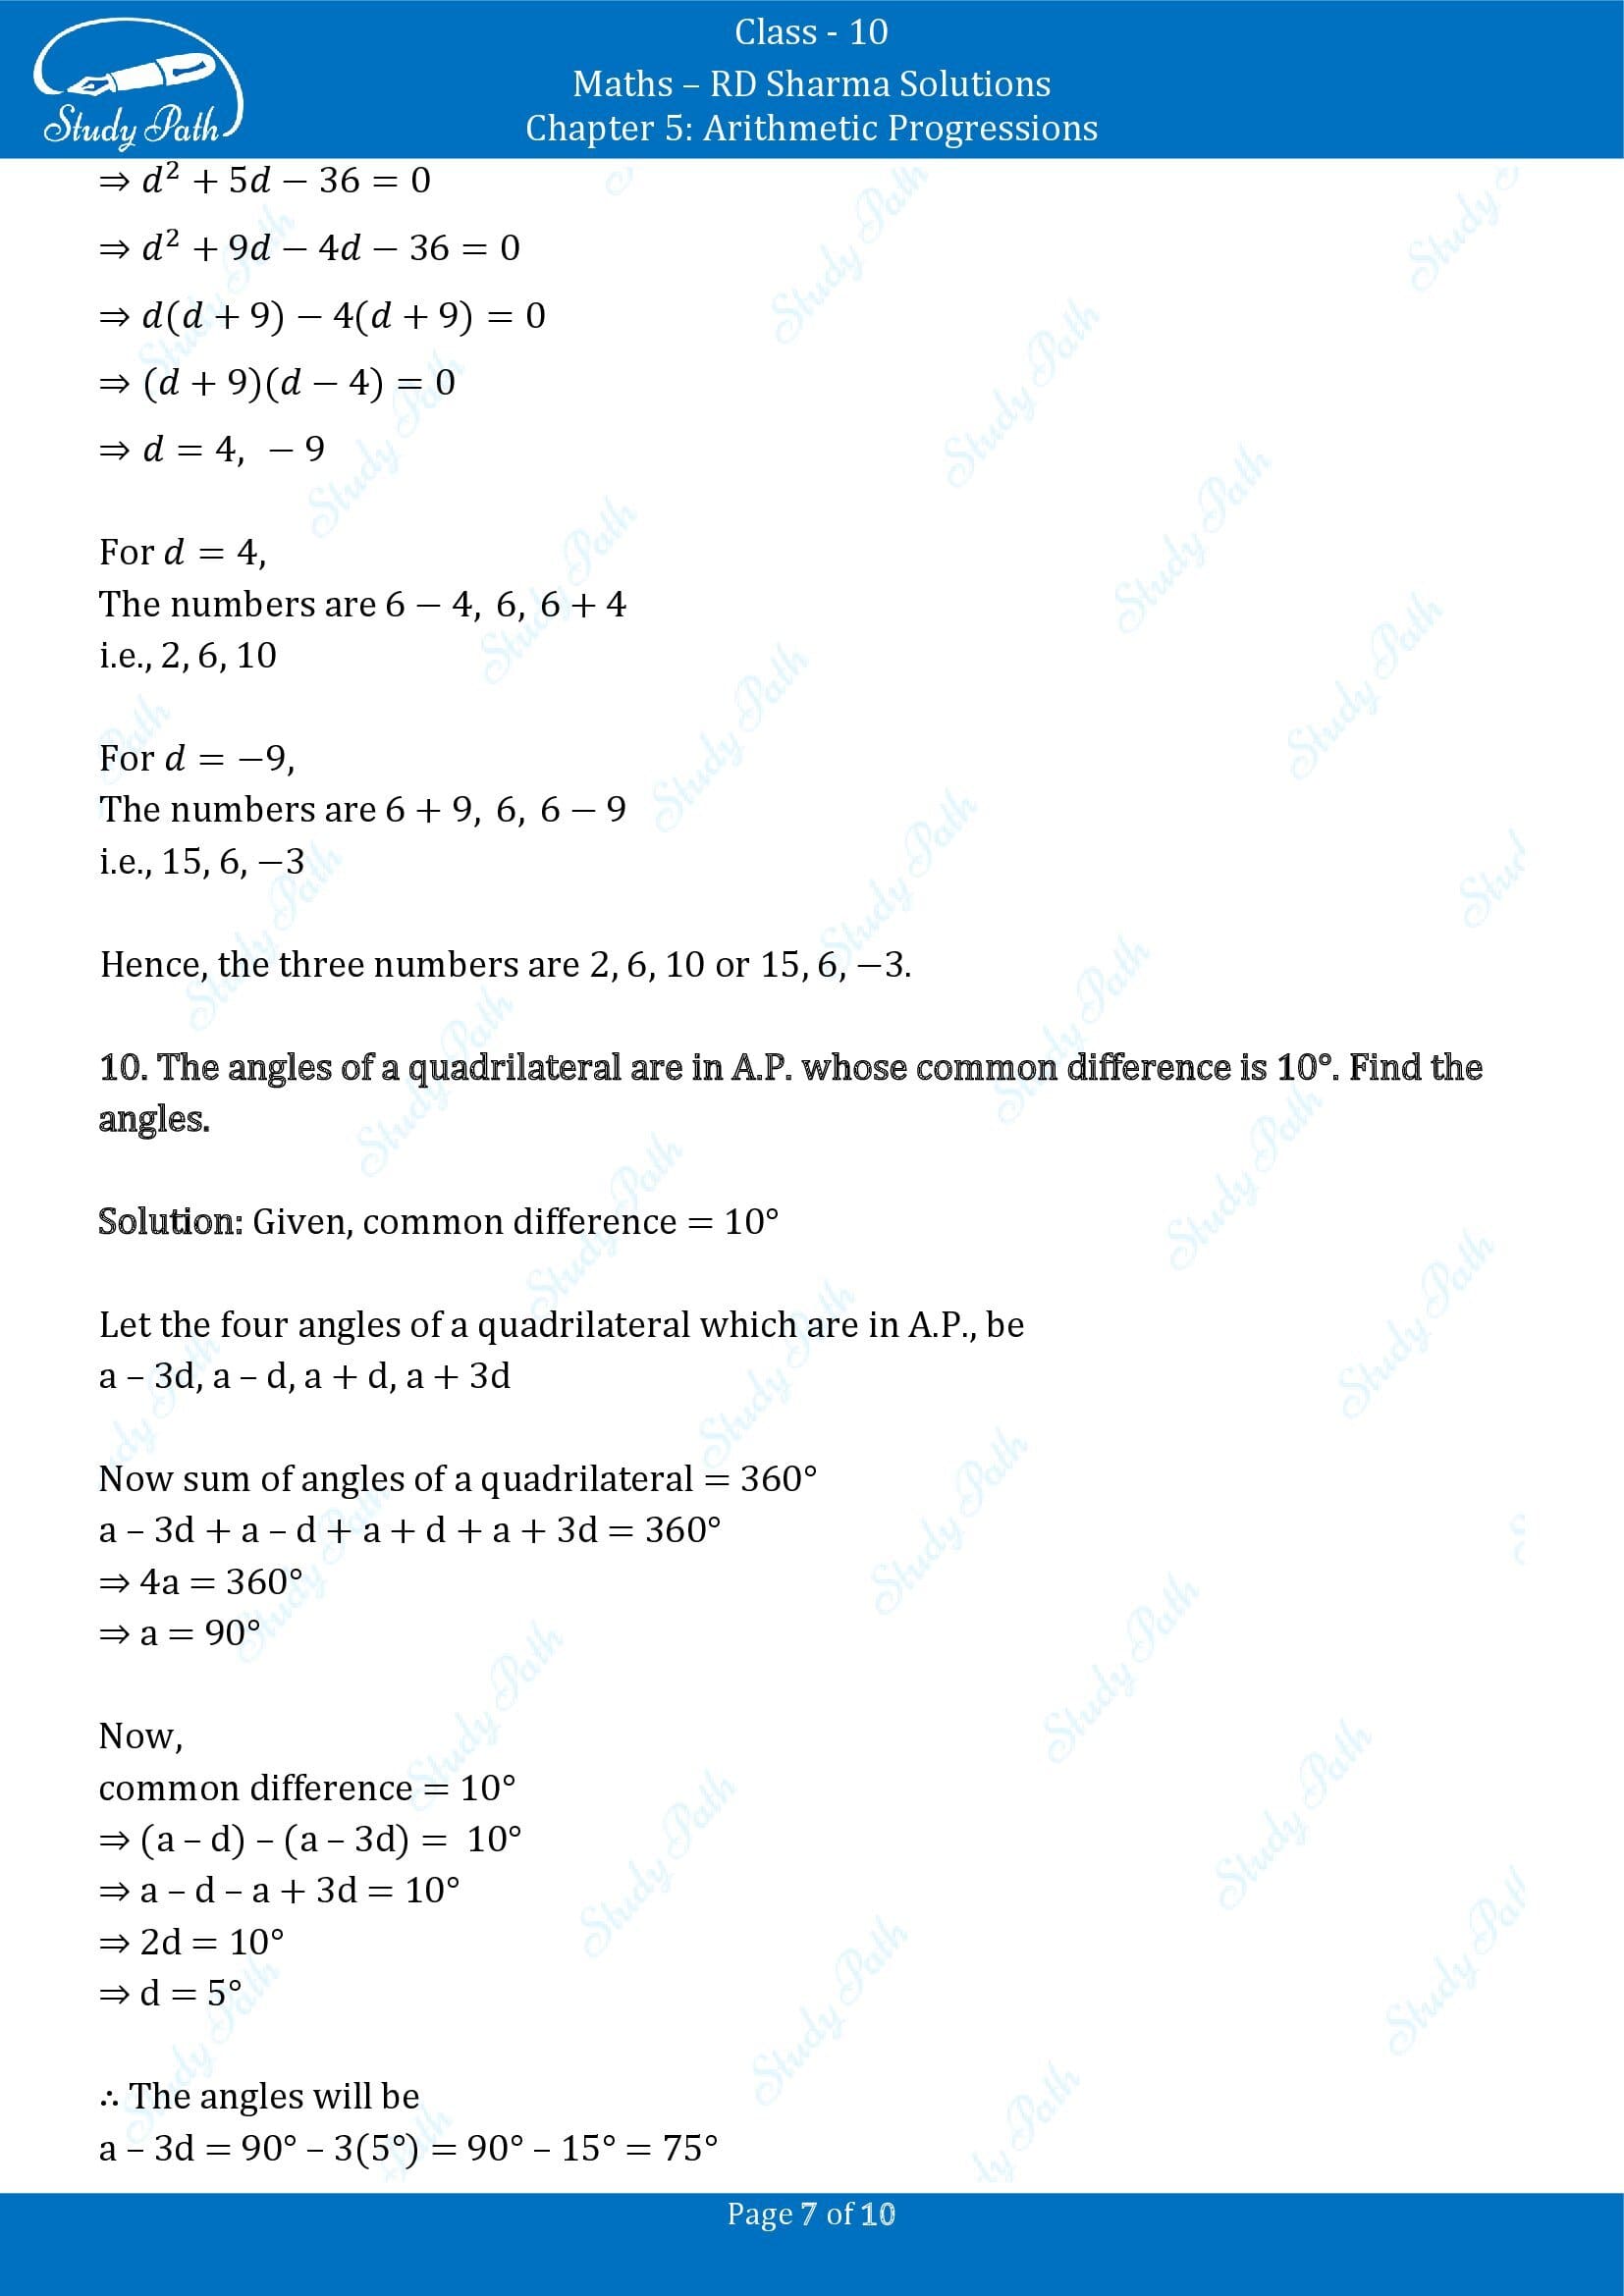 RD Sharma Solutions Class 10 Chapter 5 Arithmetic Progressions Exercise 5.5 00007